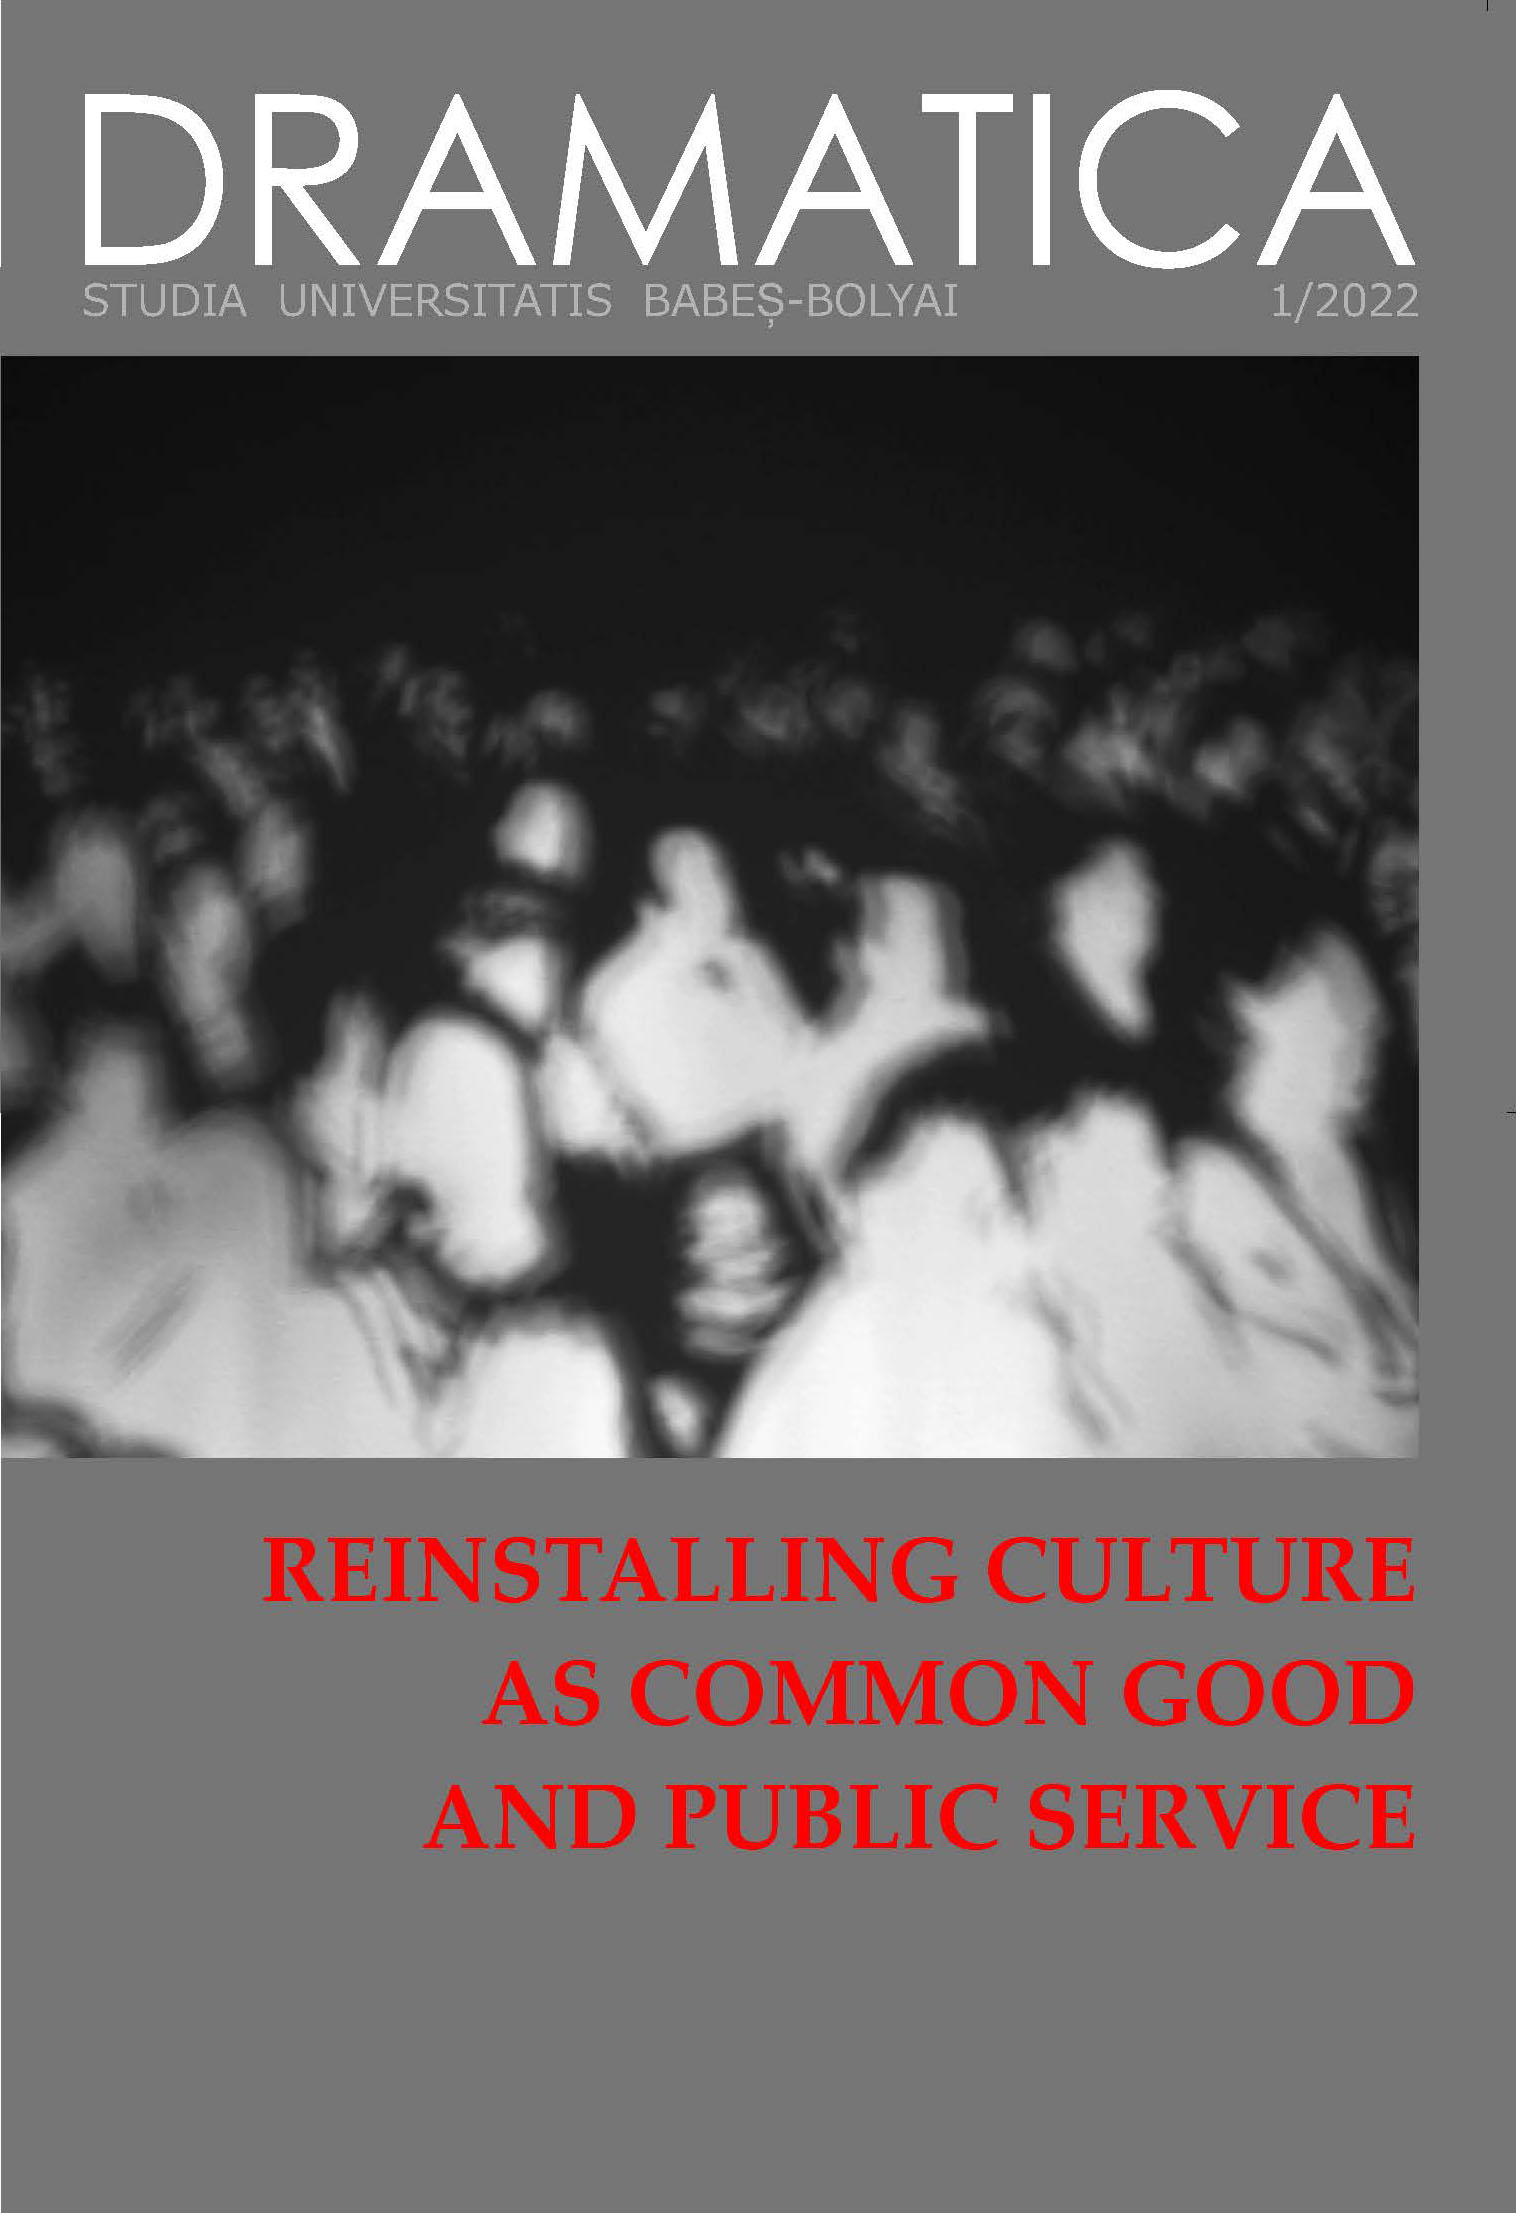 					View Vol. 67 No. 1 (2022): Reinstalling culture as common good and public service 
				